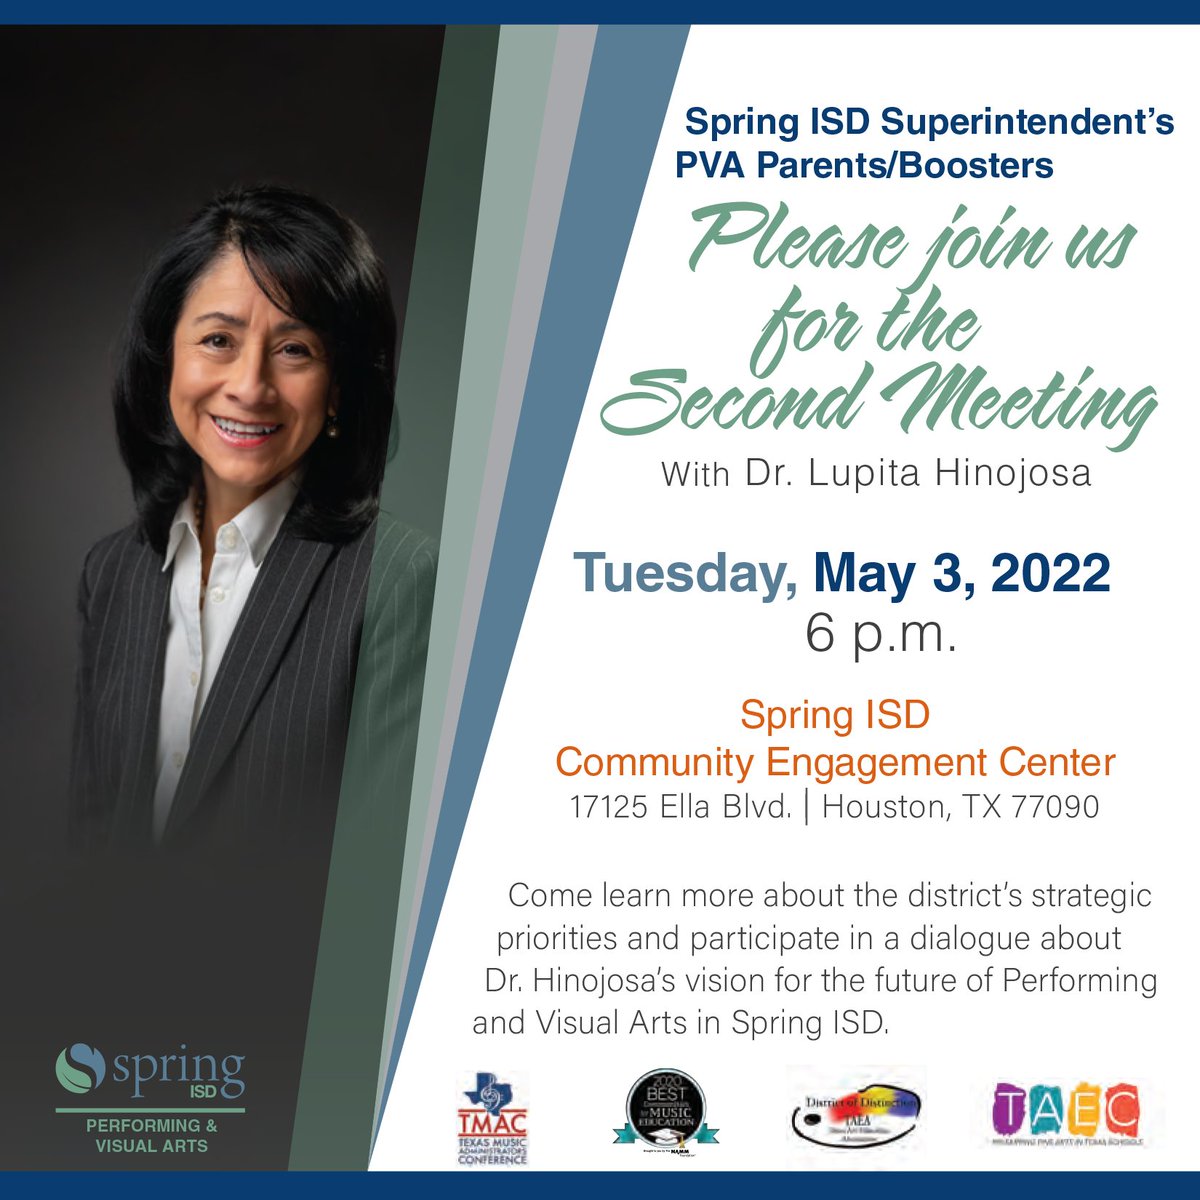 Please come join us in a Q&A and conversation between Spring ISD Performing and Visual Arts Parents and Superintendent, Dr. Hinojosa! We hope to see you there! @Shuester @SpringISD @dlandgre @amandalynnbyers @PVAJohnny #SISDPVA @SpringISDPVA